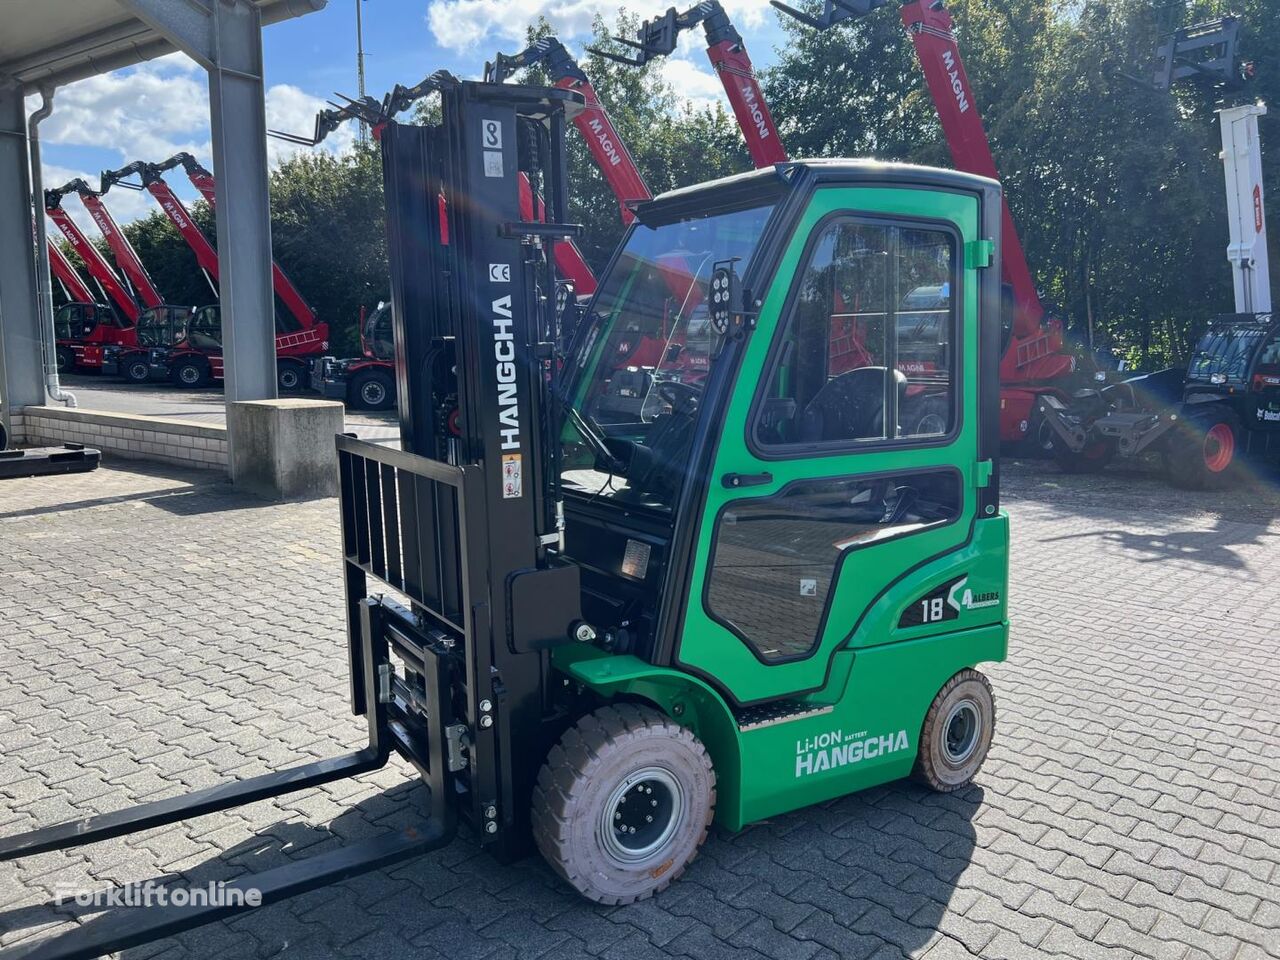 HC CPD 18 XD4-SI16 electric forklift